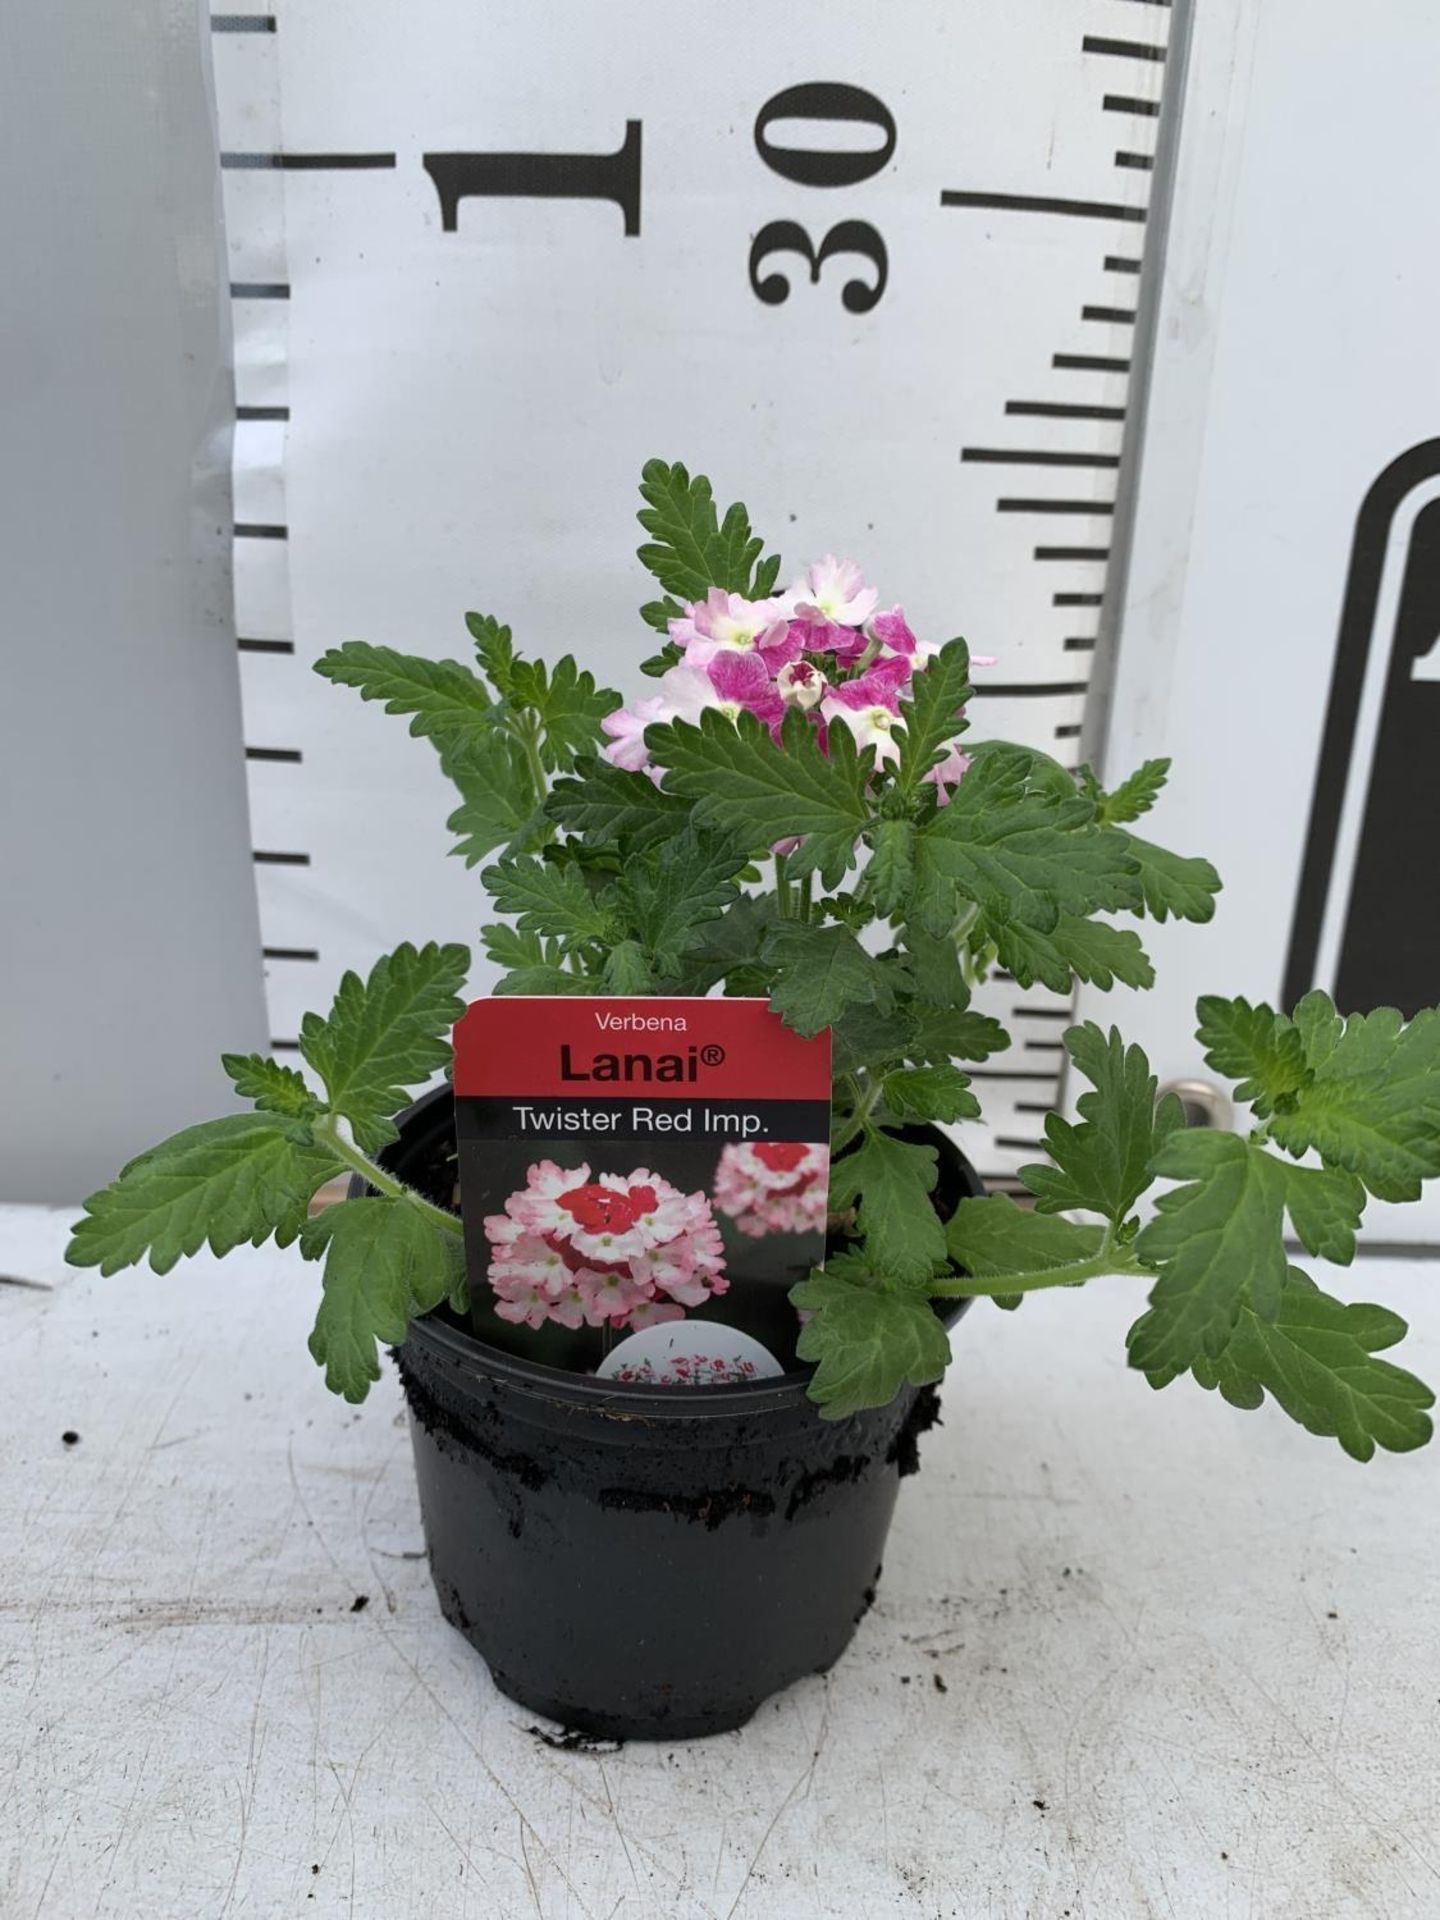 FIFTEEN VERBENA LANAI 'TWISTER RED IMP' BASKET PLANTS ON A TRAY IN P9 POTS PLUS VAT TO BE SOLD FOR - Bild 3 aus 4